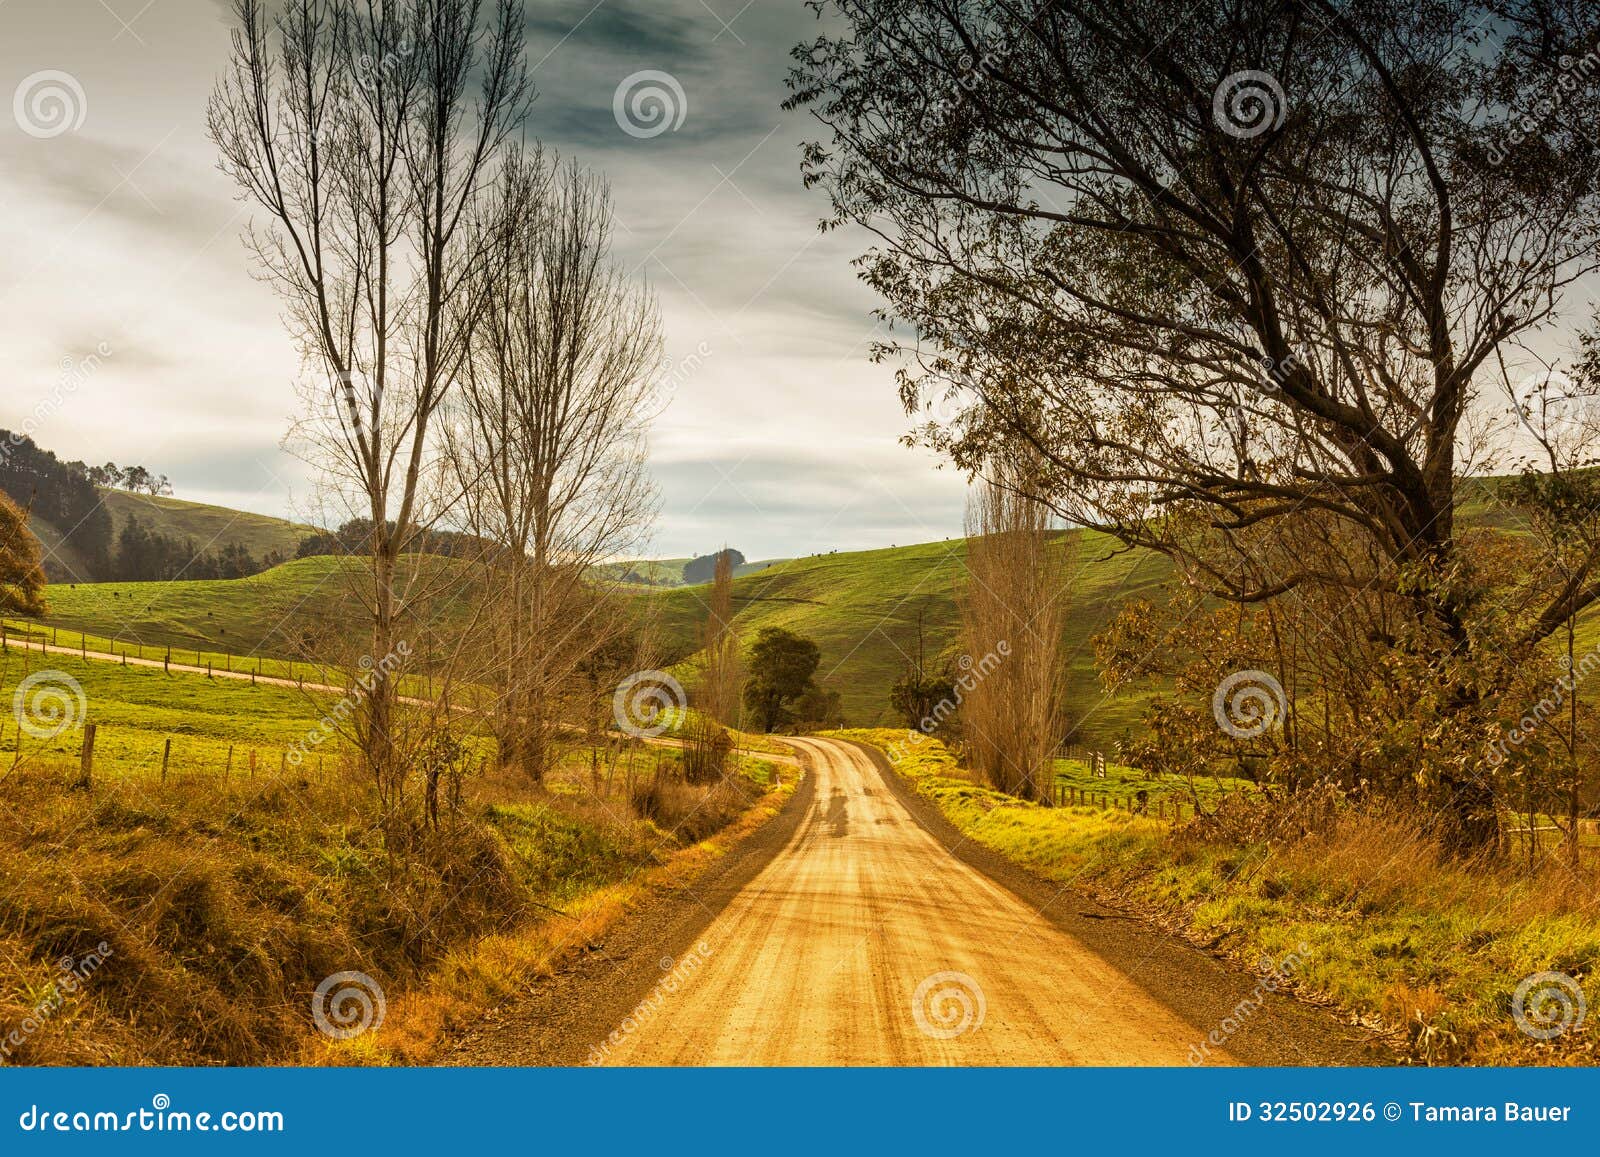 country road in australia